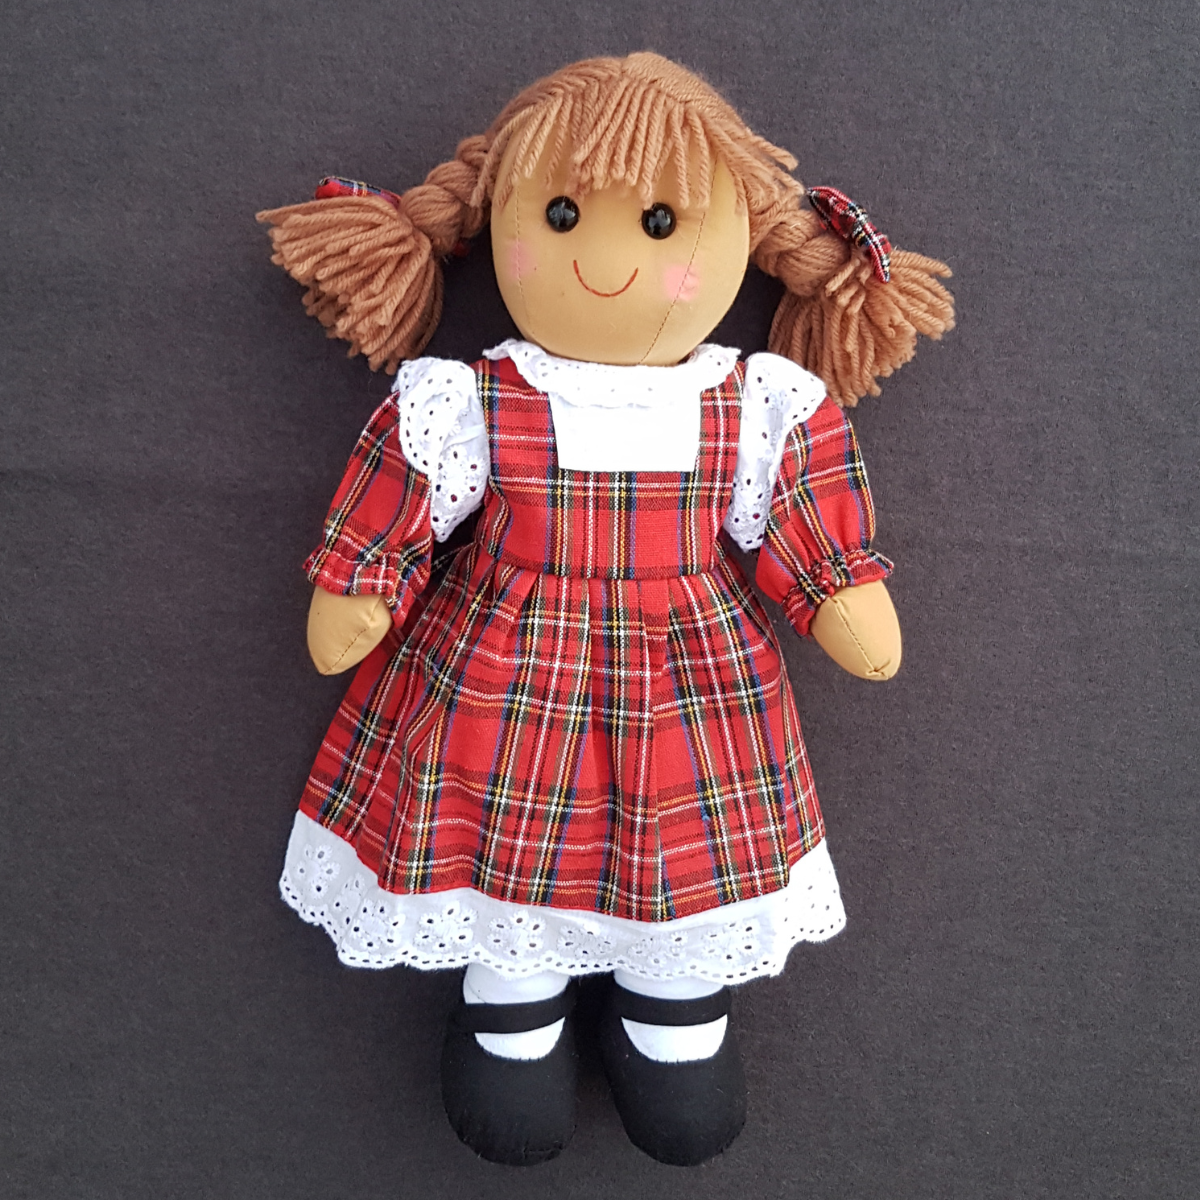 image of a personalised rag doll with brown hair in plaits and wearing a red Scottish tartan dress. The dress has white trim at the top of the arms and around the hem of the dress. Underneath the dress she is wearing white pantaloons and she has black cloth shoes sewn onto her feet. The dolls dress can be personalised with a name of your choice which will be embroidered in white thread.